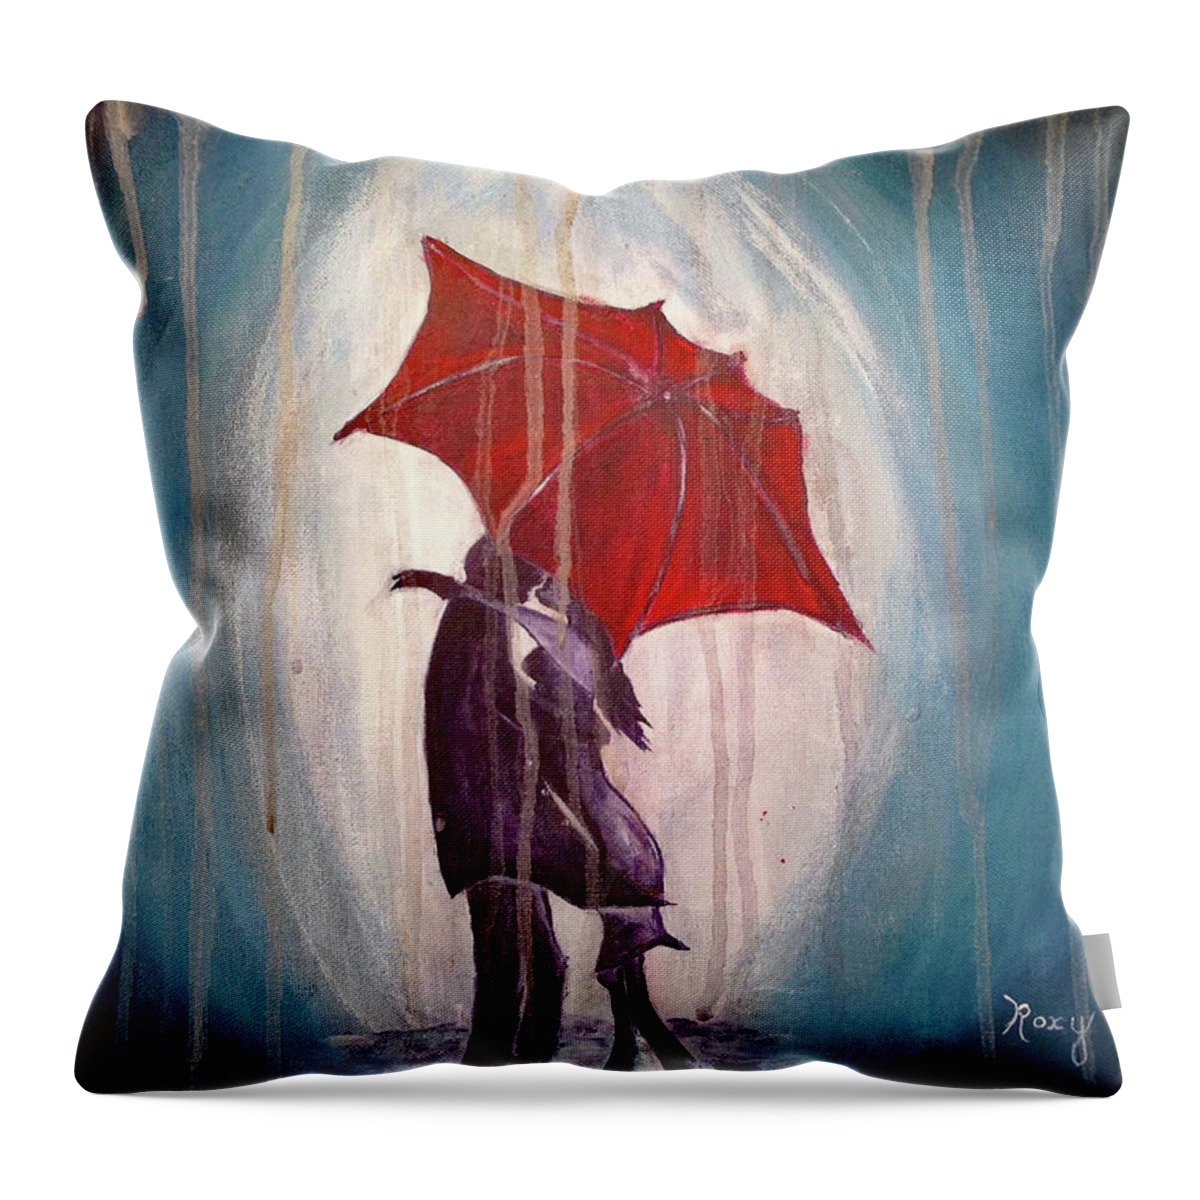 Romantic Couple Throw Pillow featuring the painting Romantic Couple under Umbrella by Roxy Rich